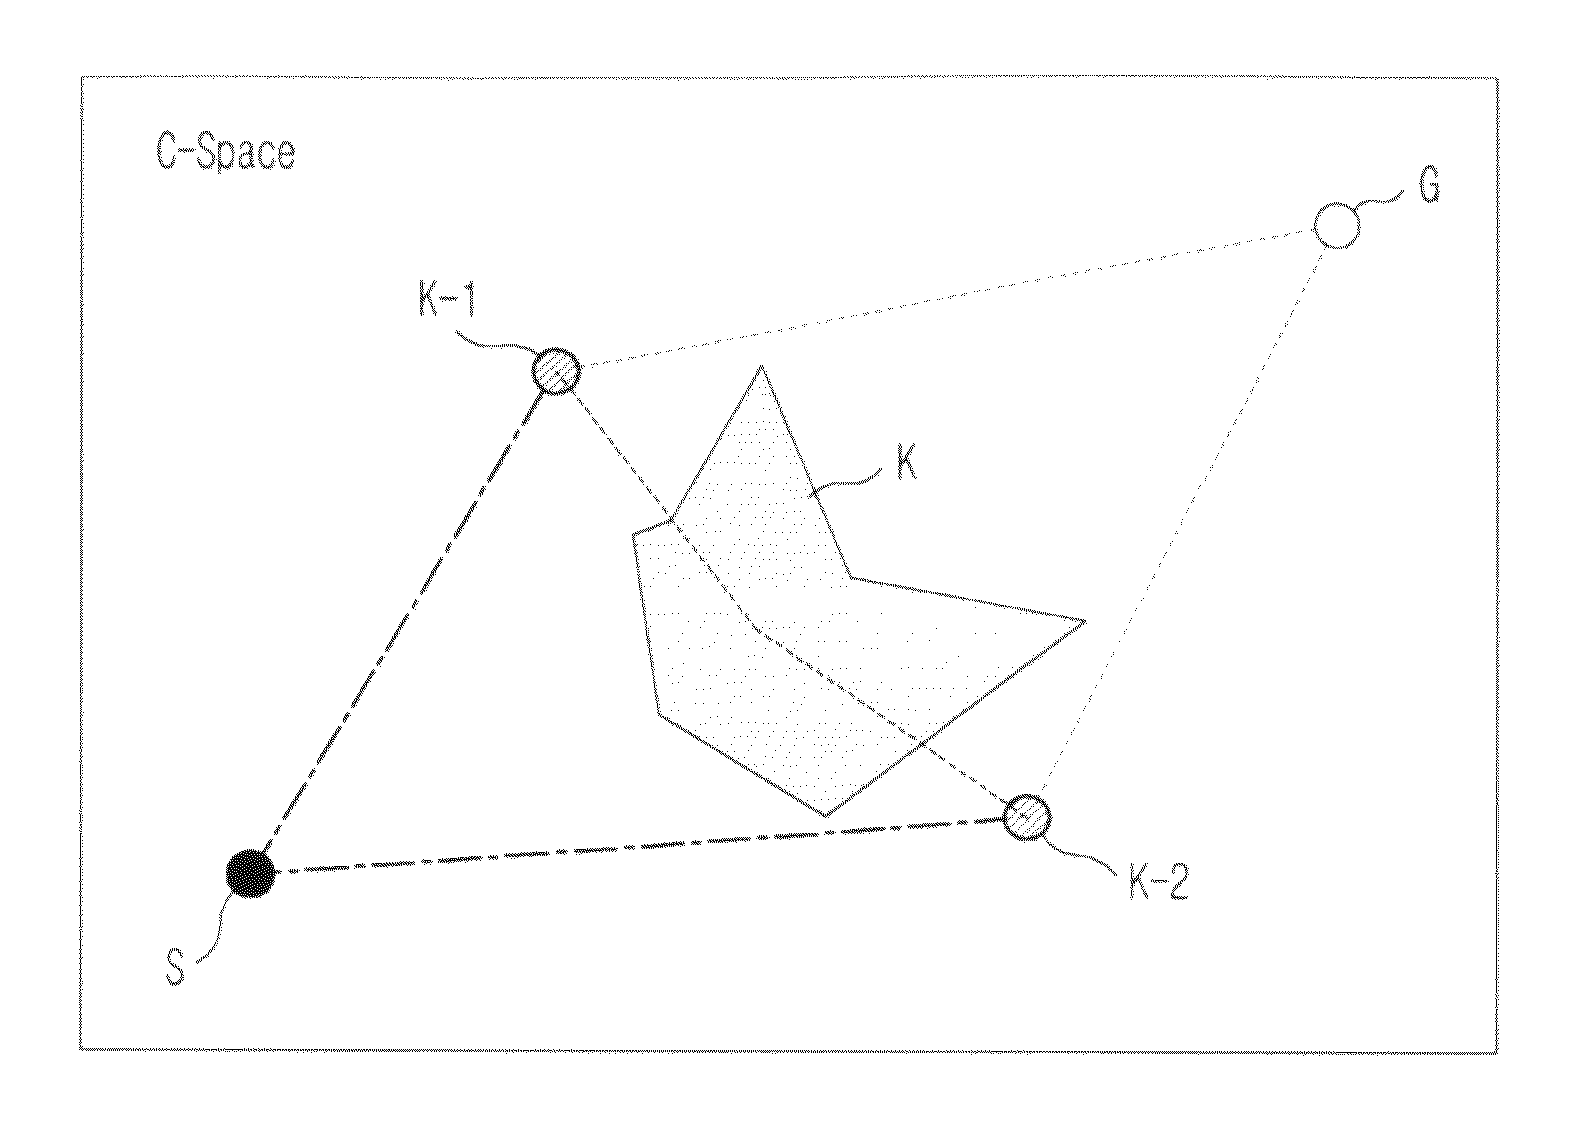 Path planning apparatus and method for robot